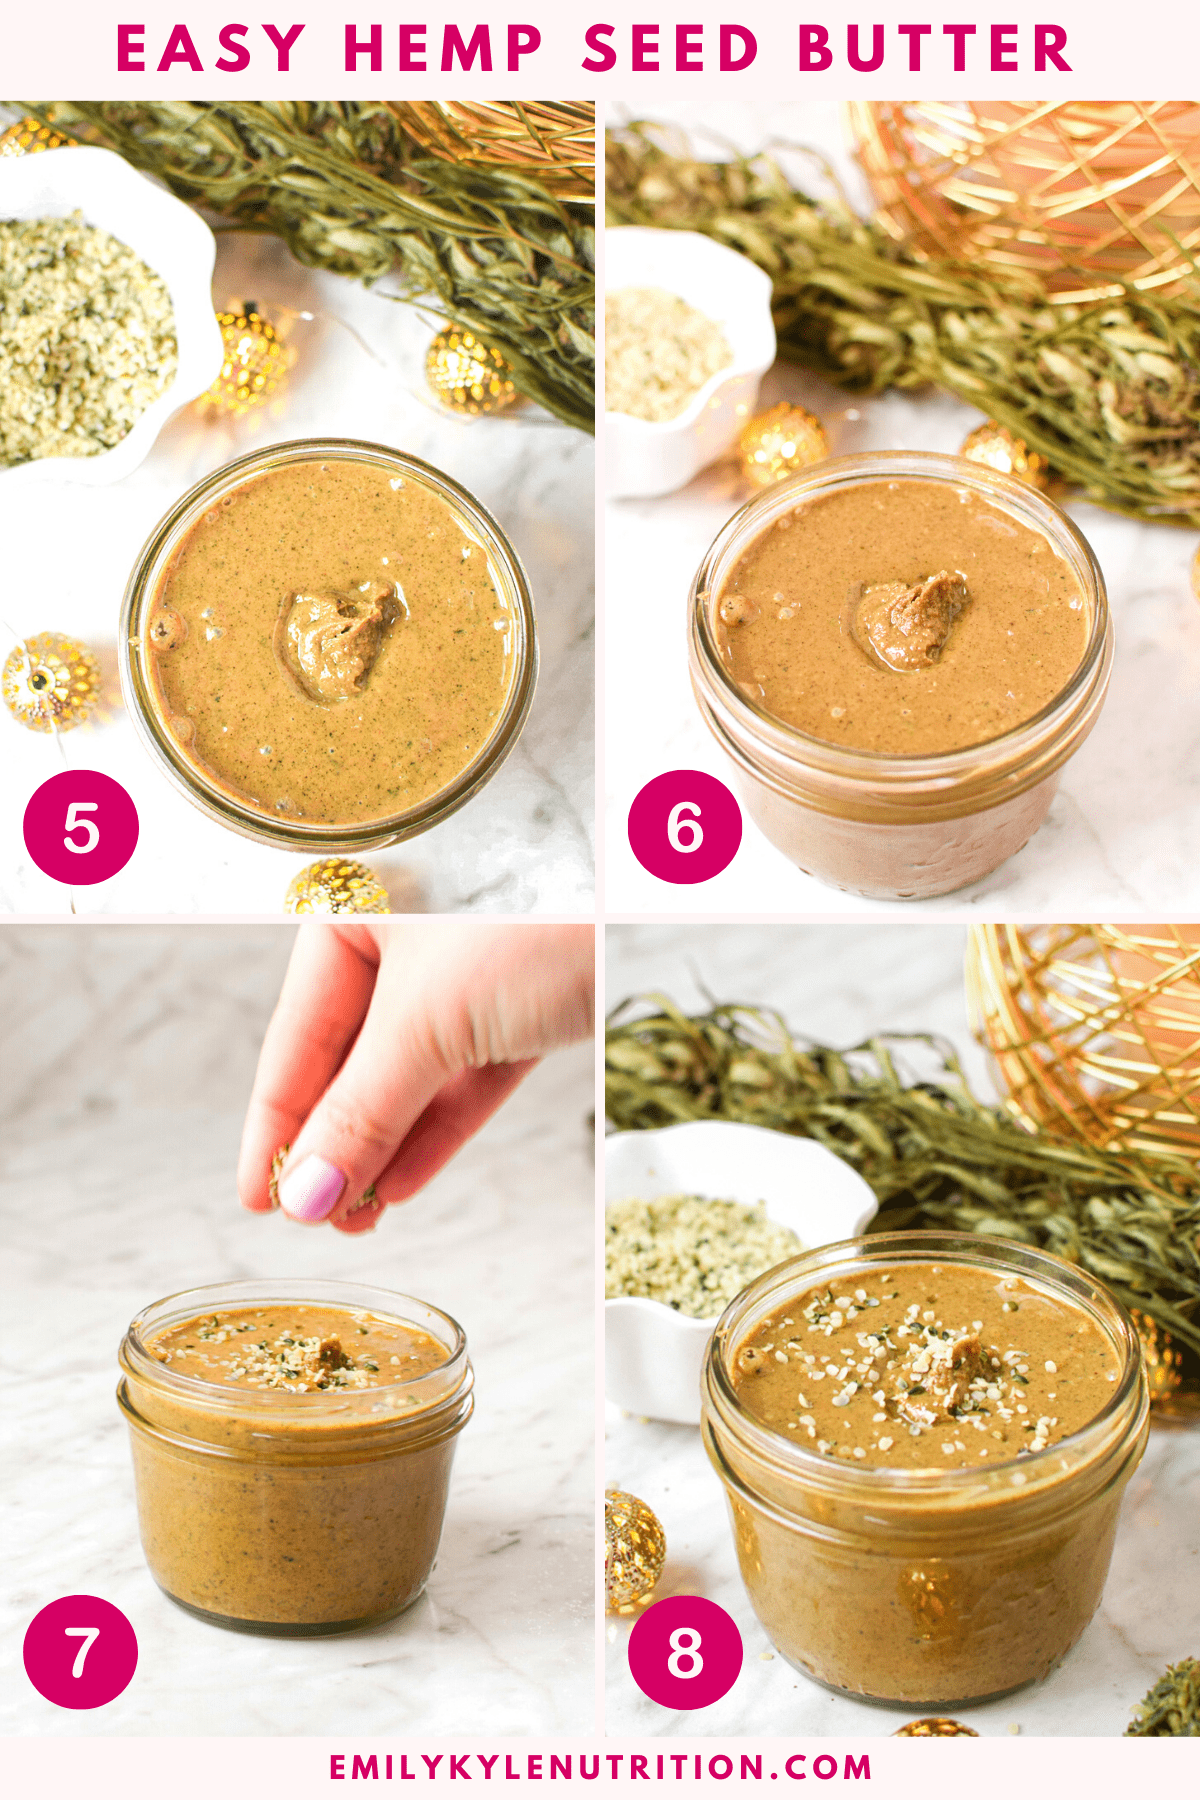 A four step image collage showing how to make homemade hemp seed butter.